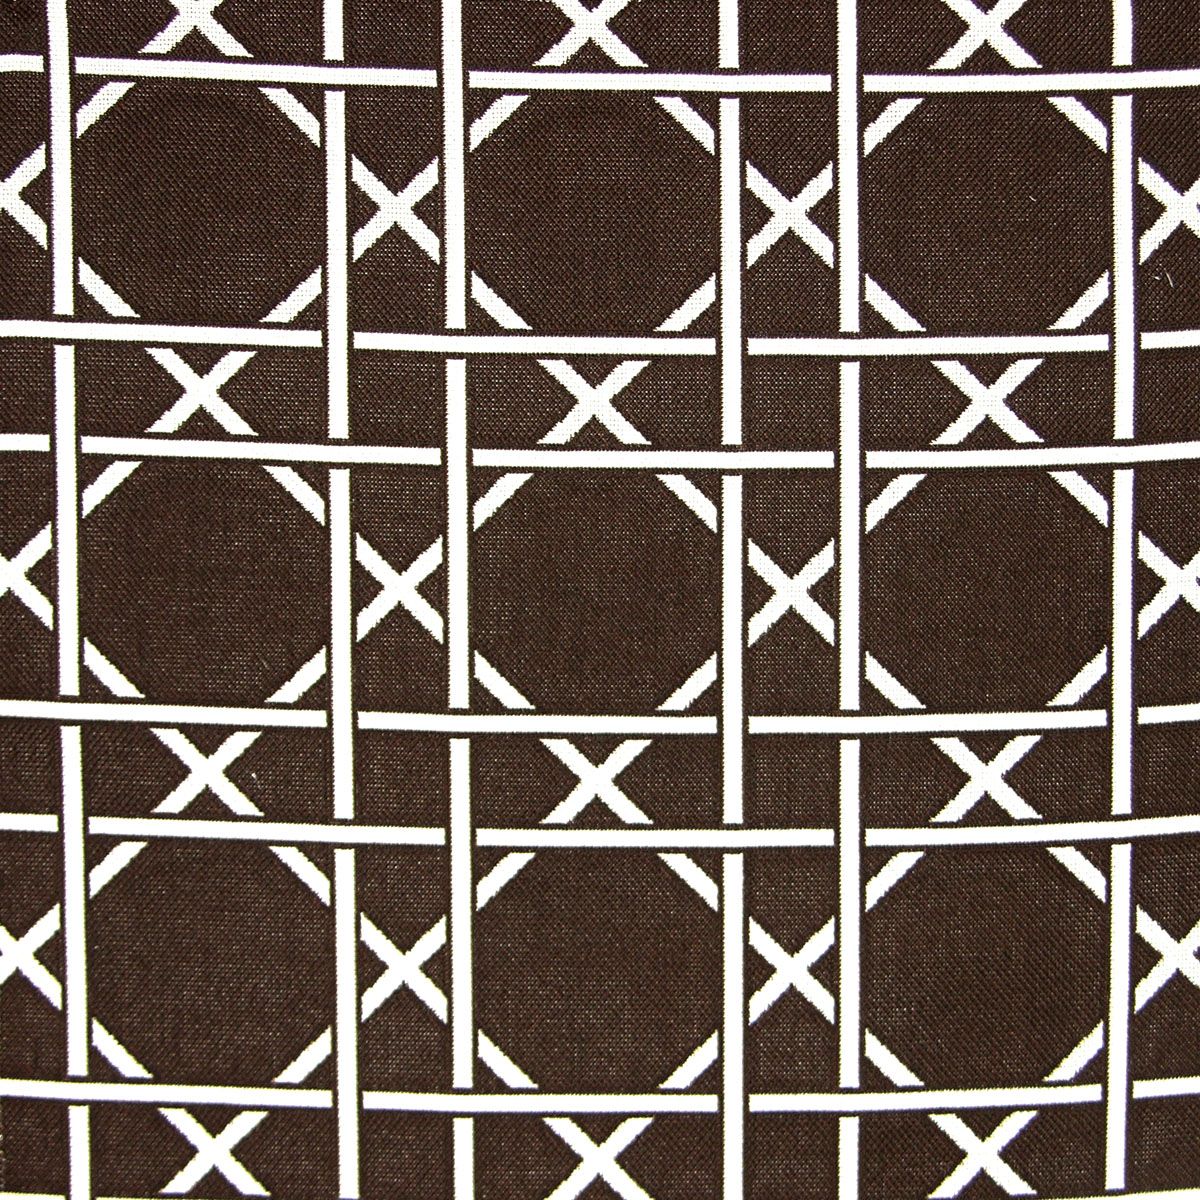 Caning fabric in walnut color - pattern number SU 00048349 - by Scalamandre in the Old World Weavers collection